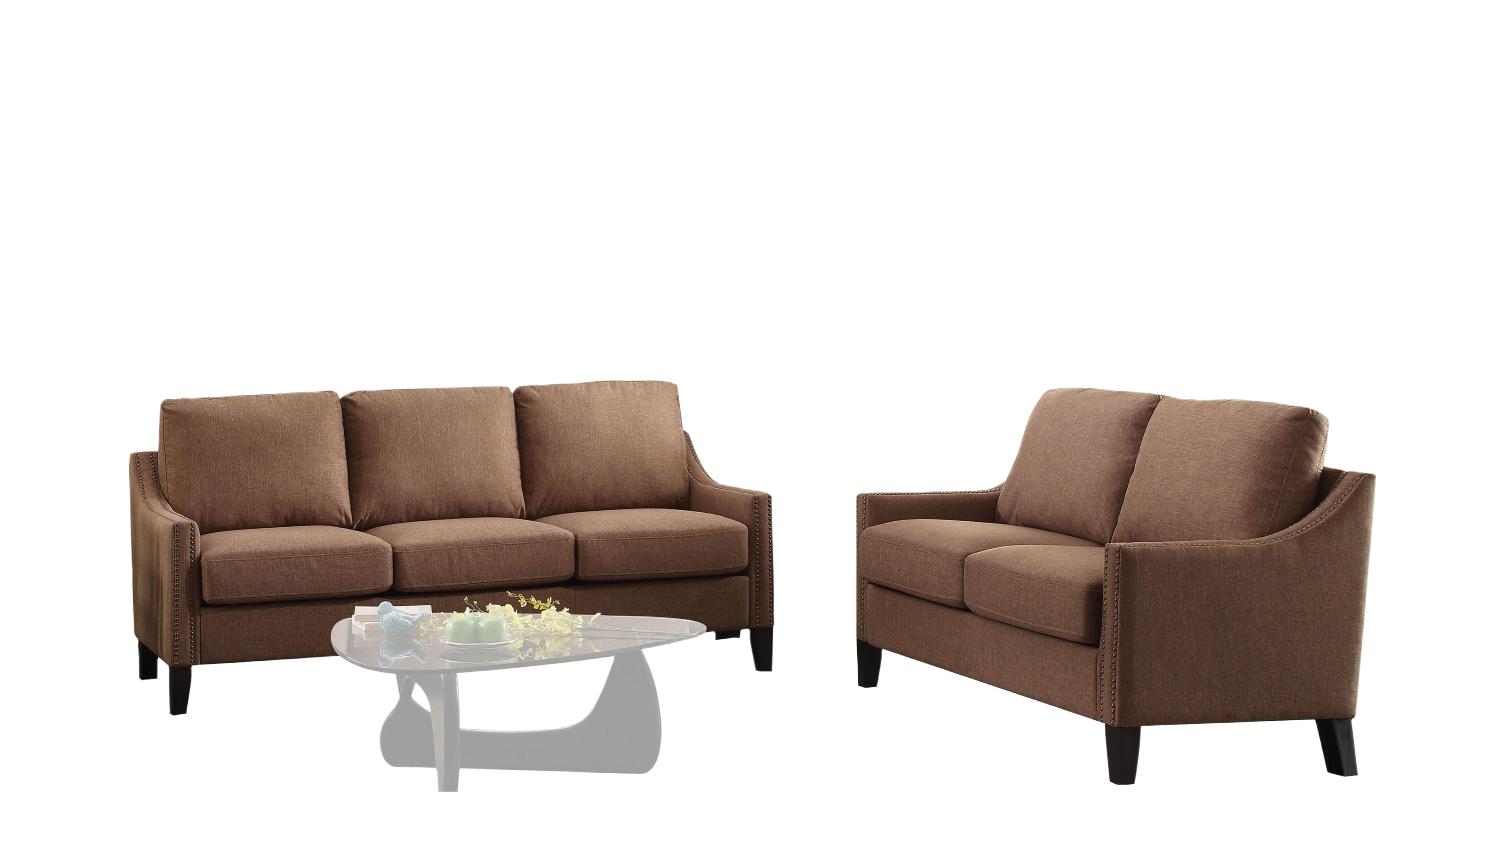 Contemporary Sofa and Loveseat Set Zapata 53765-2pcs in Brown Linen